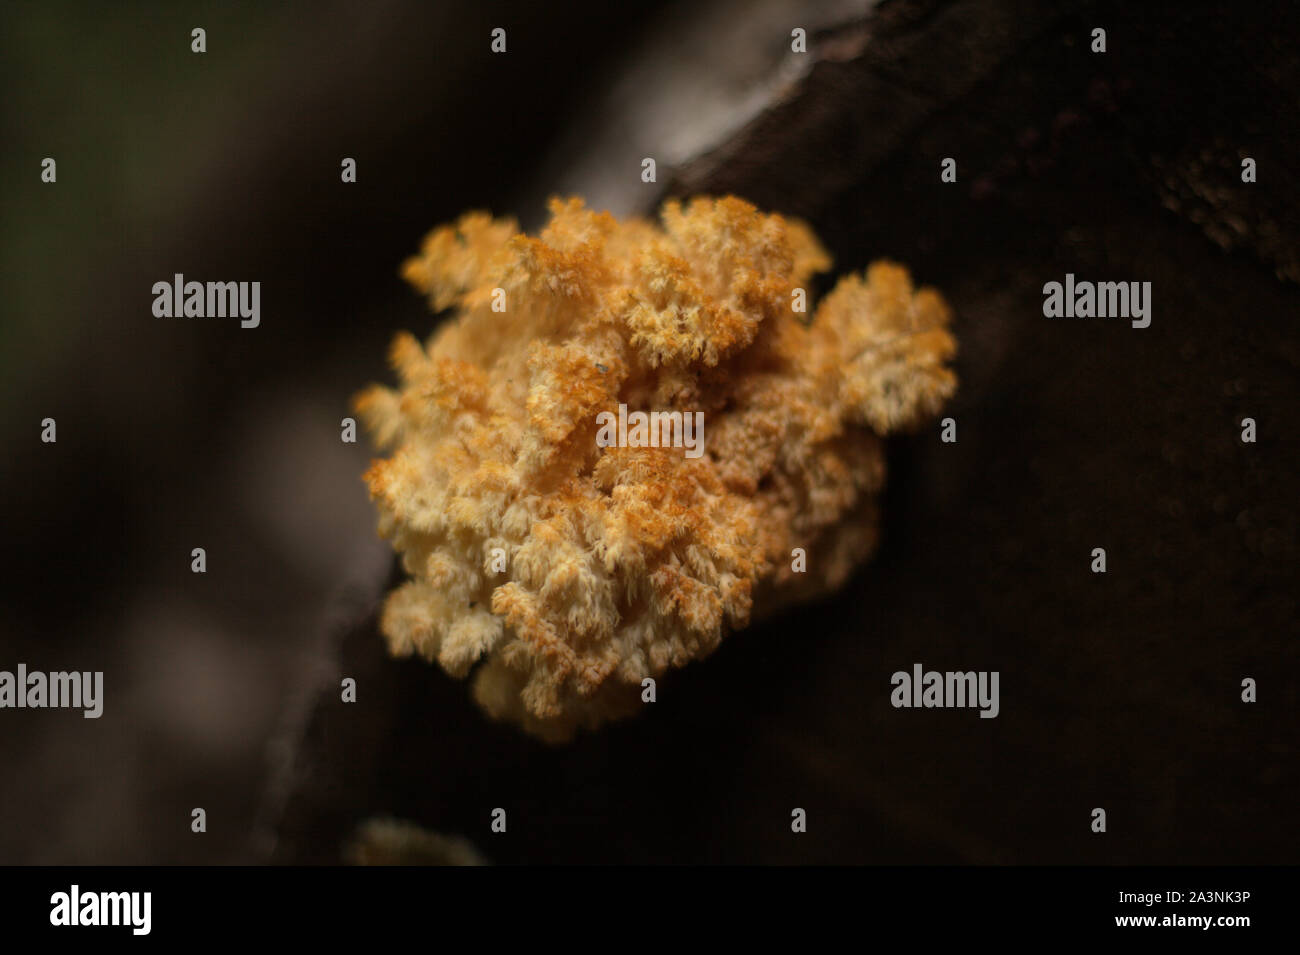 An unknown yellow-orange coral wild mushroom growing on a dead log in autumn, in BC, Canada Stock Photo